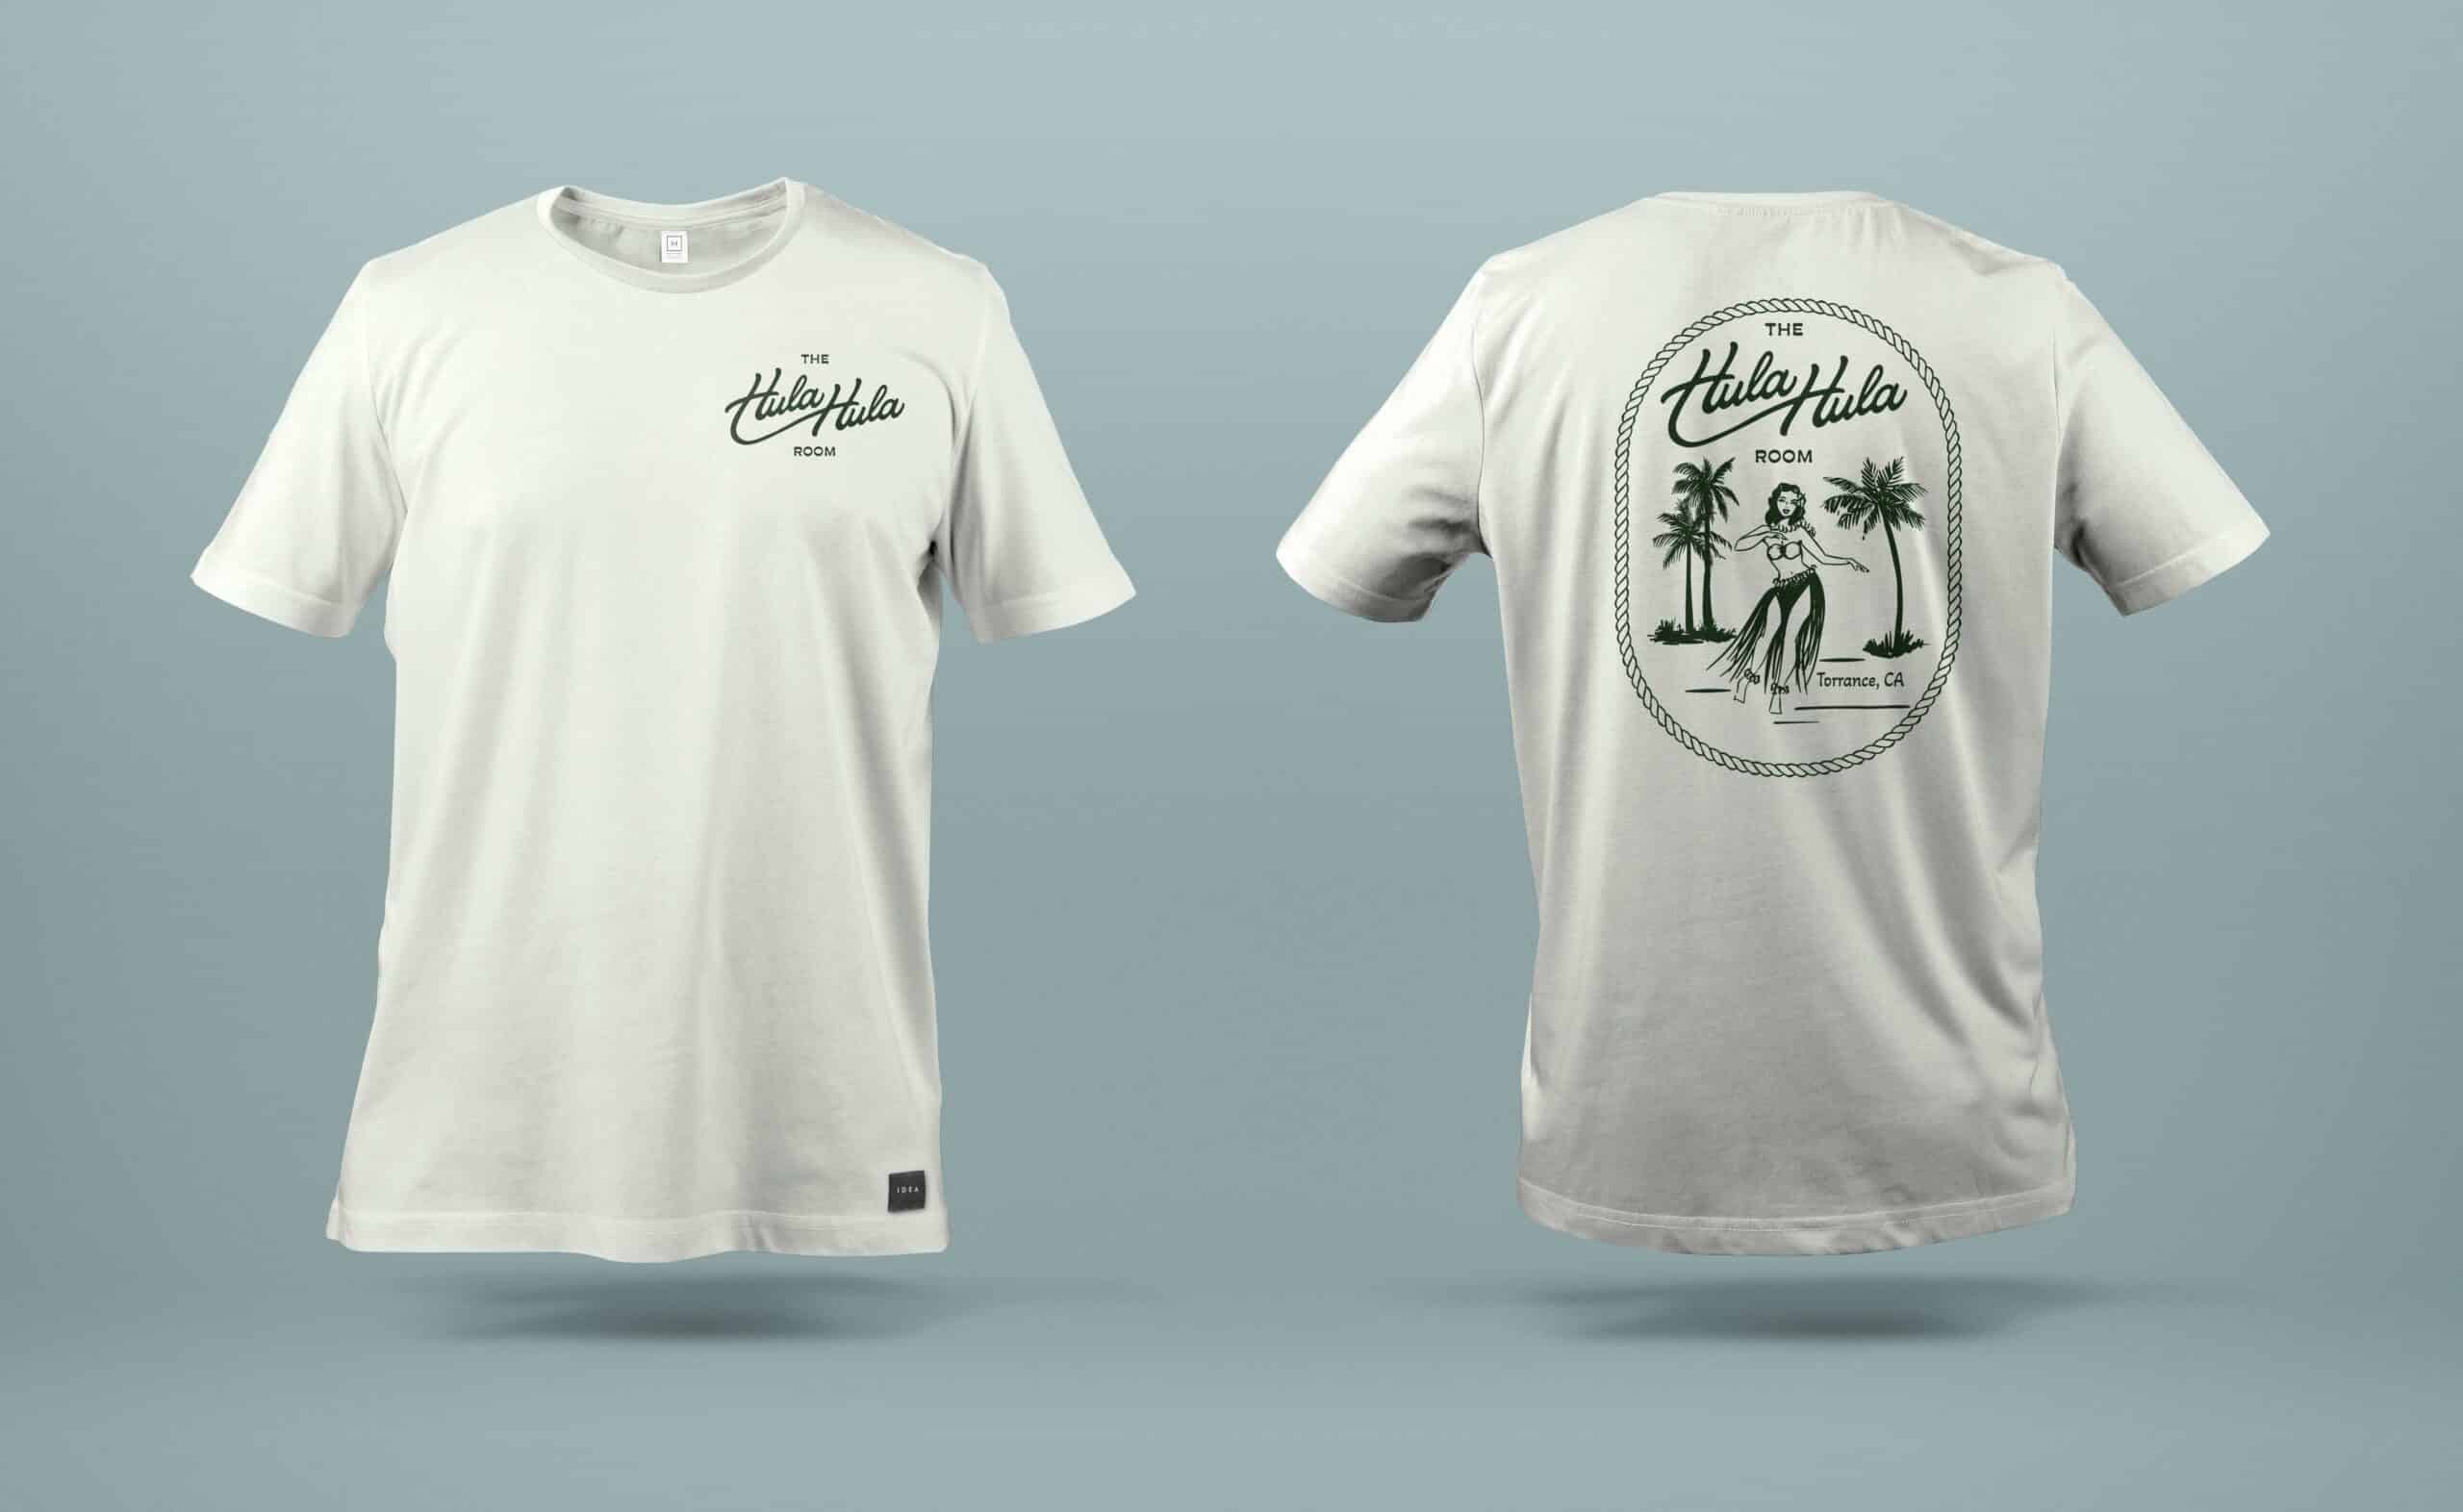 t-shirt graphic for The Hula Hula Room Tiki Bar in Torrance California designed by Stellen Design logo design and branding agency in Los Angeles California specializing in logo design for hospitality brands